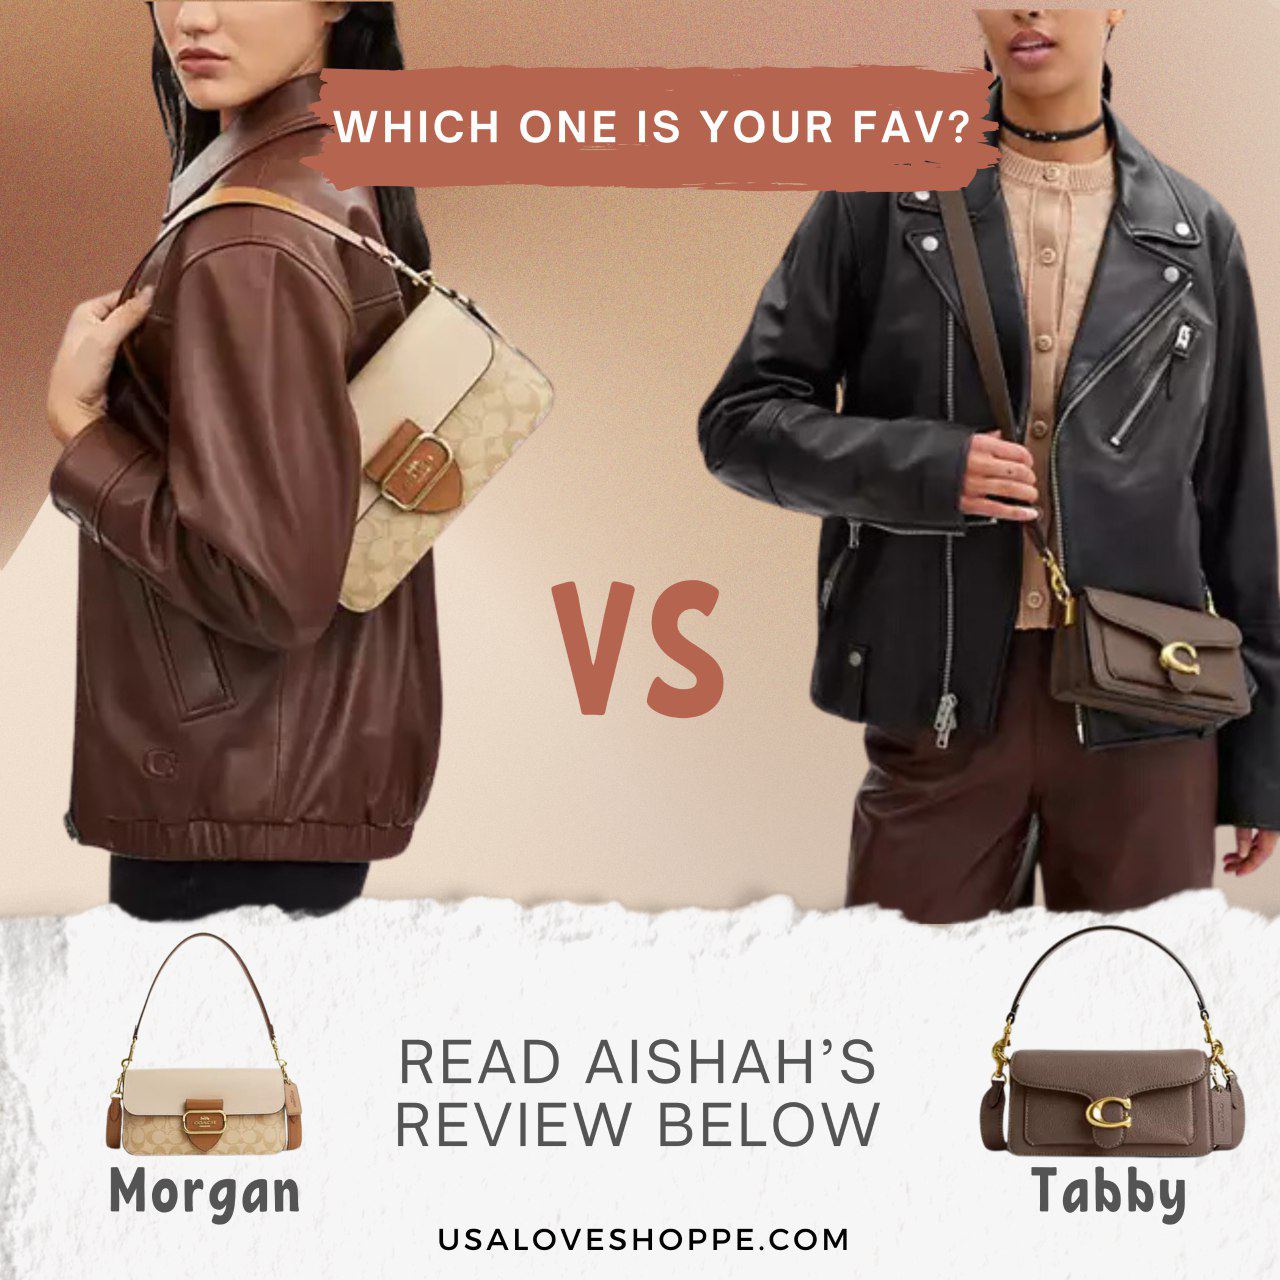 Elegance Redefined: Coach Outlet Morgan vs. Coach Retail Tabby Shoulder Bag - Which Fits Your Style?